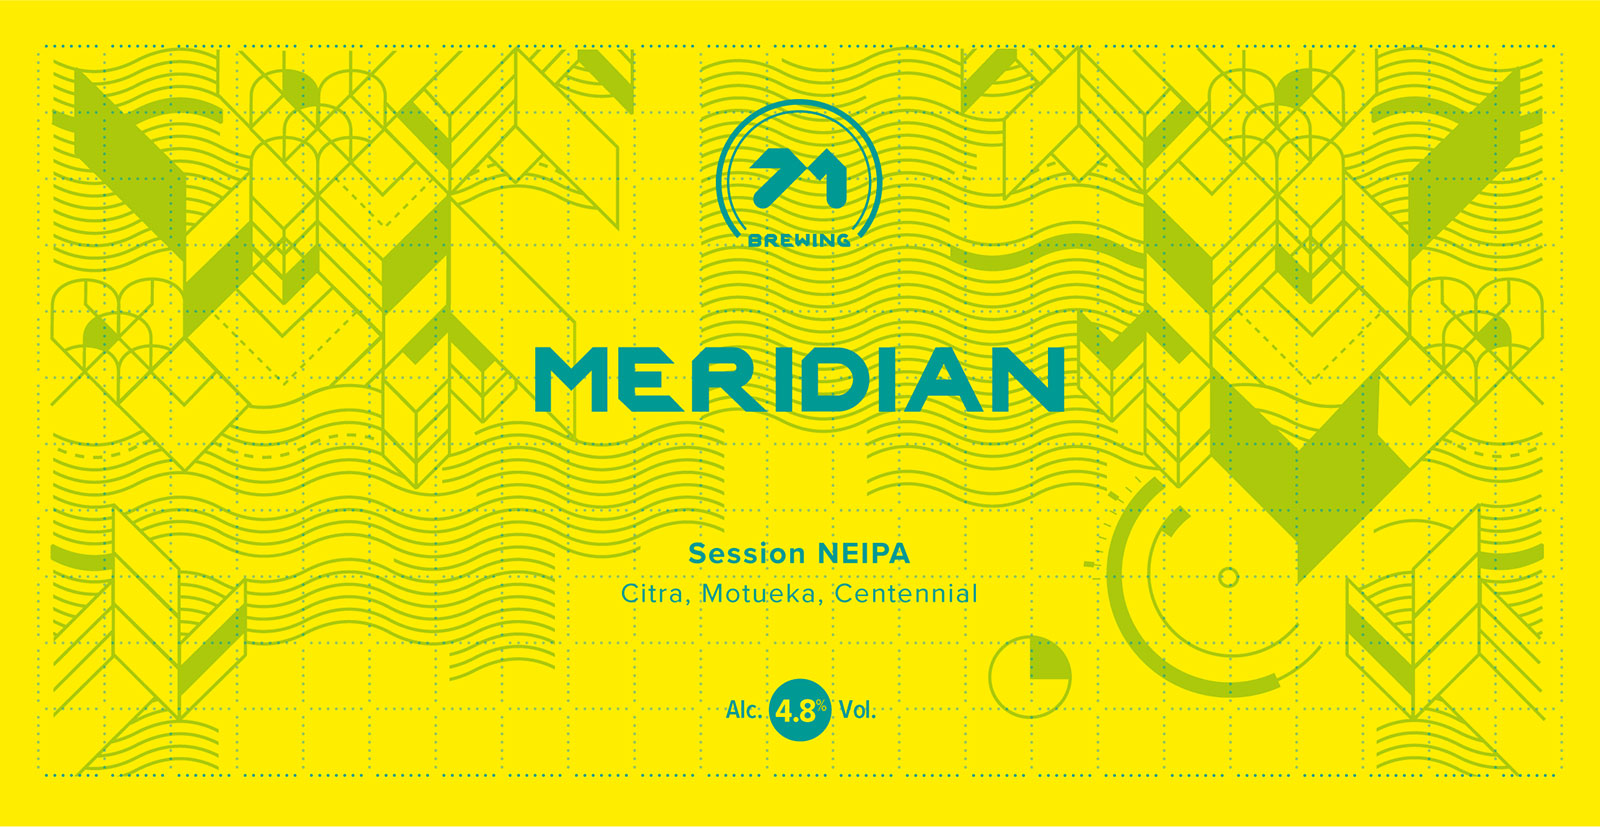 Label for Meridian a session NEIPA. Teal logo and typography ontop of a pale green geometric pattern and yellow background.